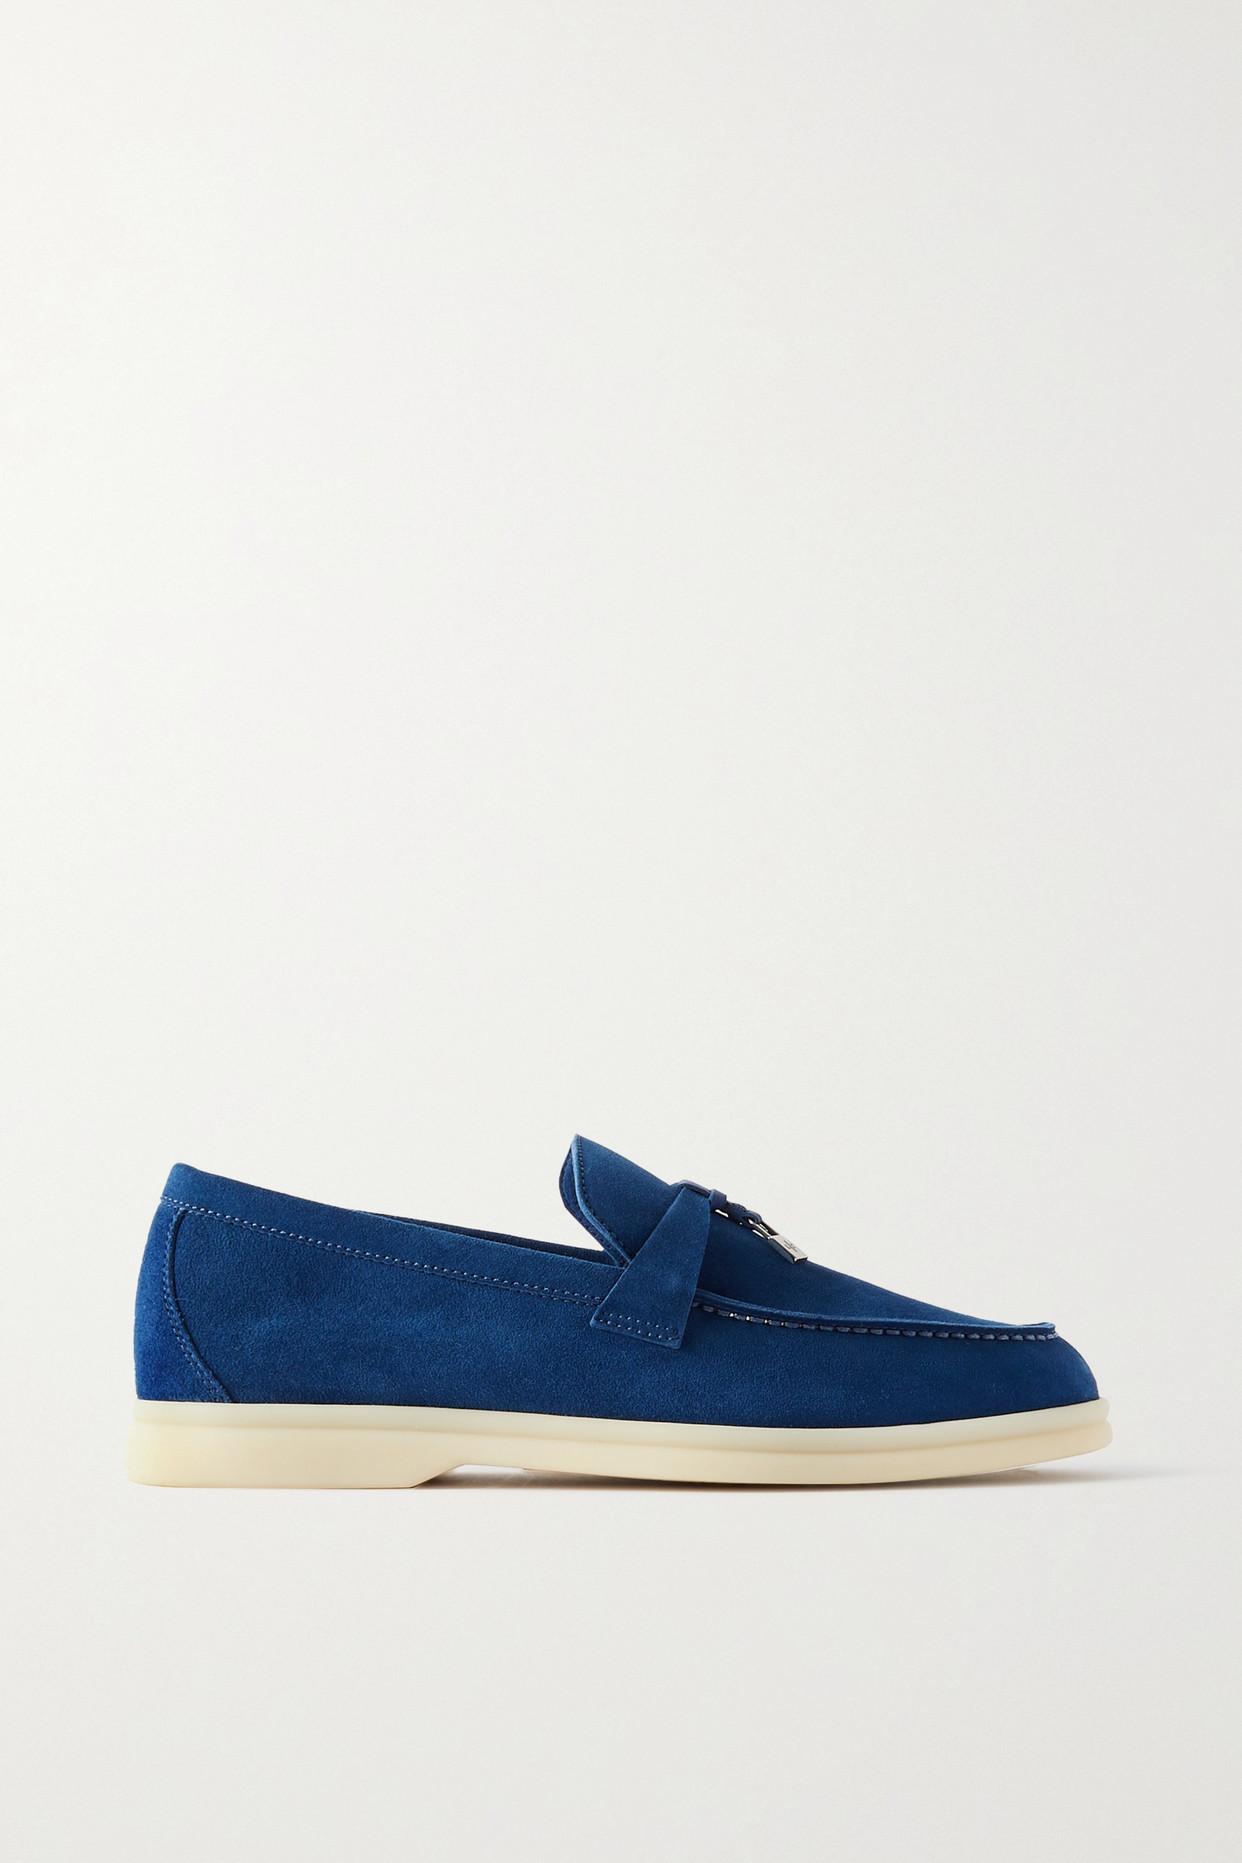 Loro Piana Summer Charms Walk Suede Loafers in Blue | Lyst